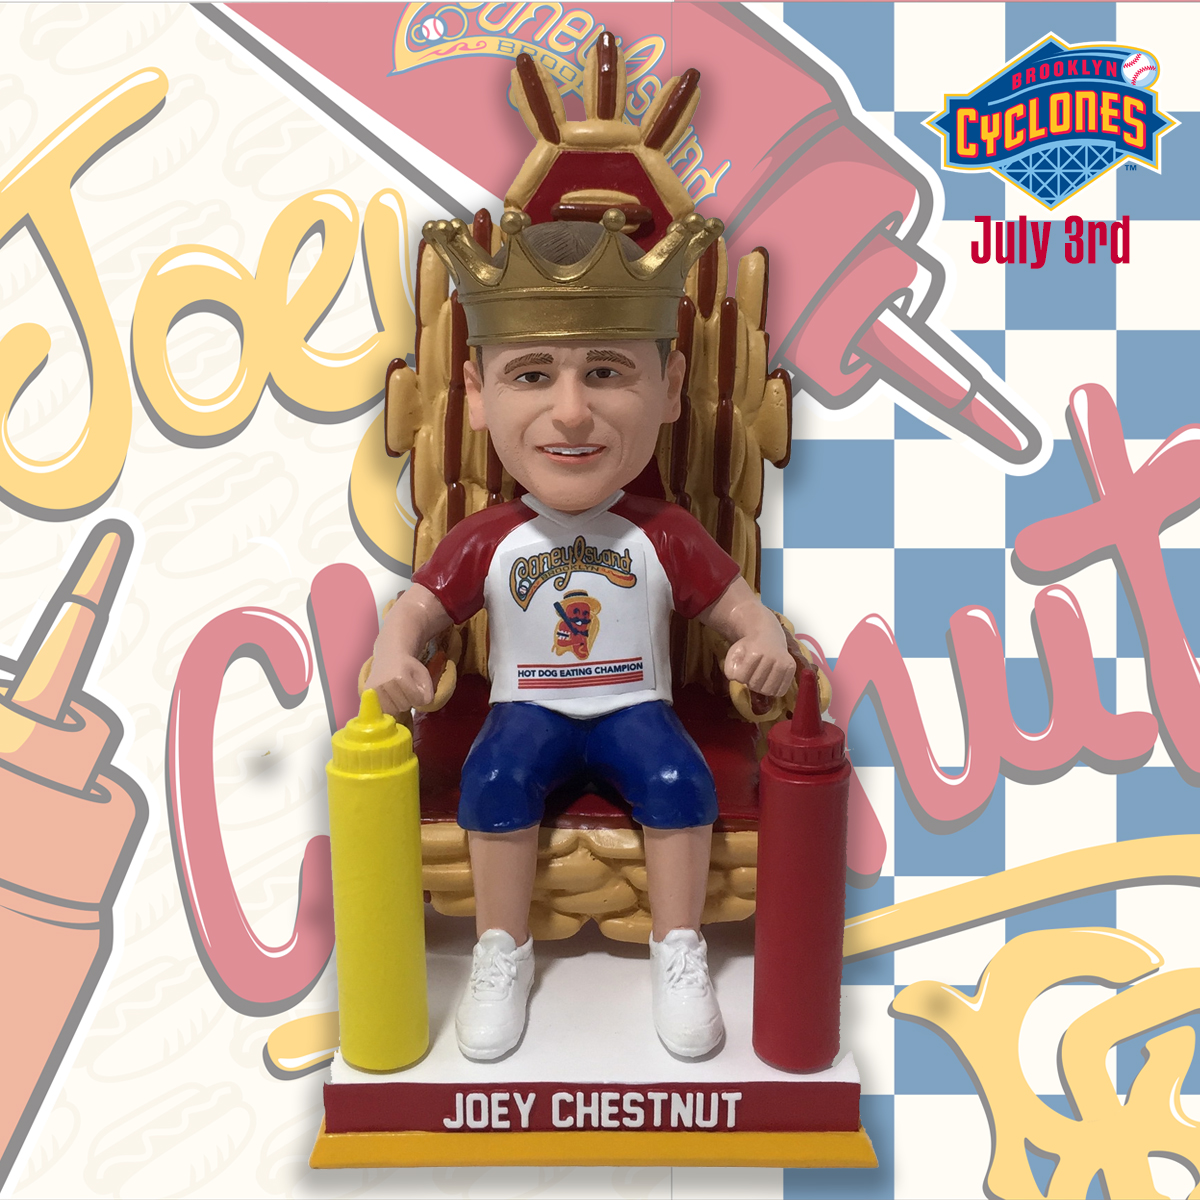 He's got that hot DAWG in him 🌭 Introducing the Joey Chestnut Glizzy King 👑Bobblehead coming to Coney Island on July 3rd. And yes, that is, in fact, a hot dog throne. 🎟️ - bit.ly/4biGPtq #MiLB #AmazinStartsHere #LGM